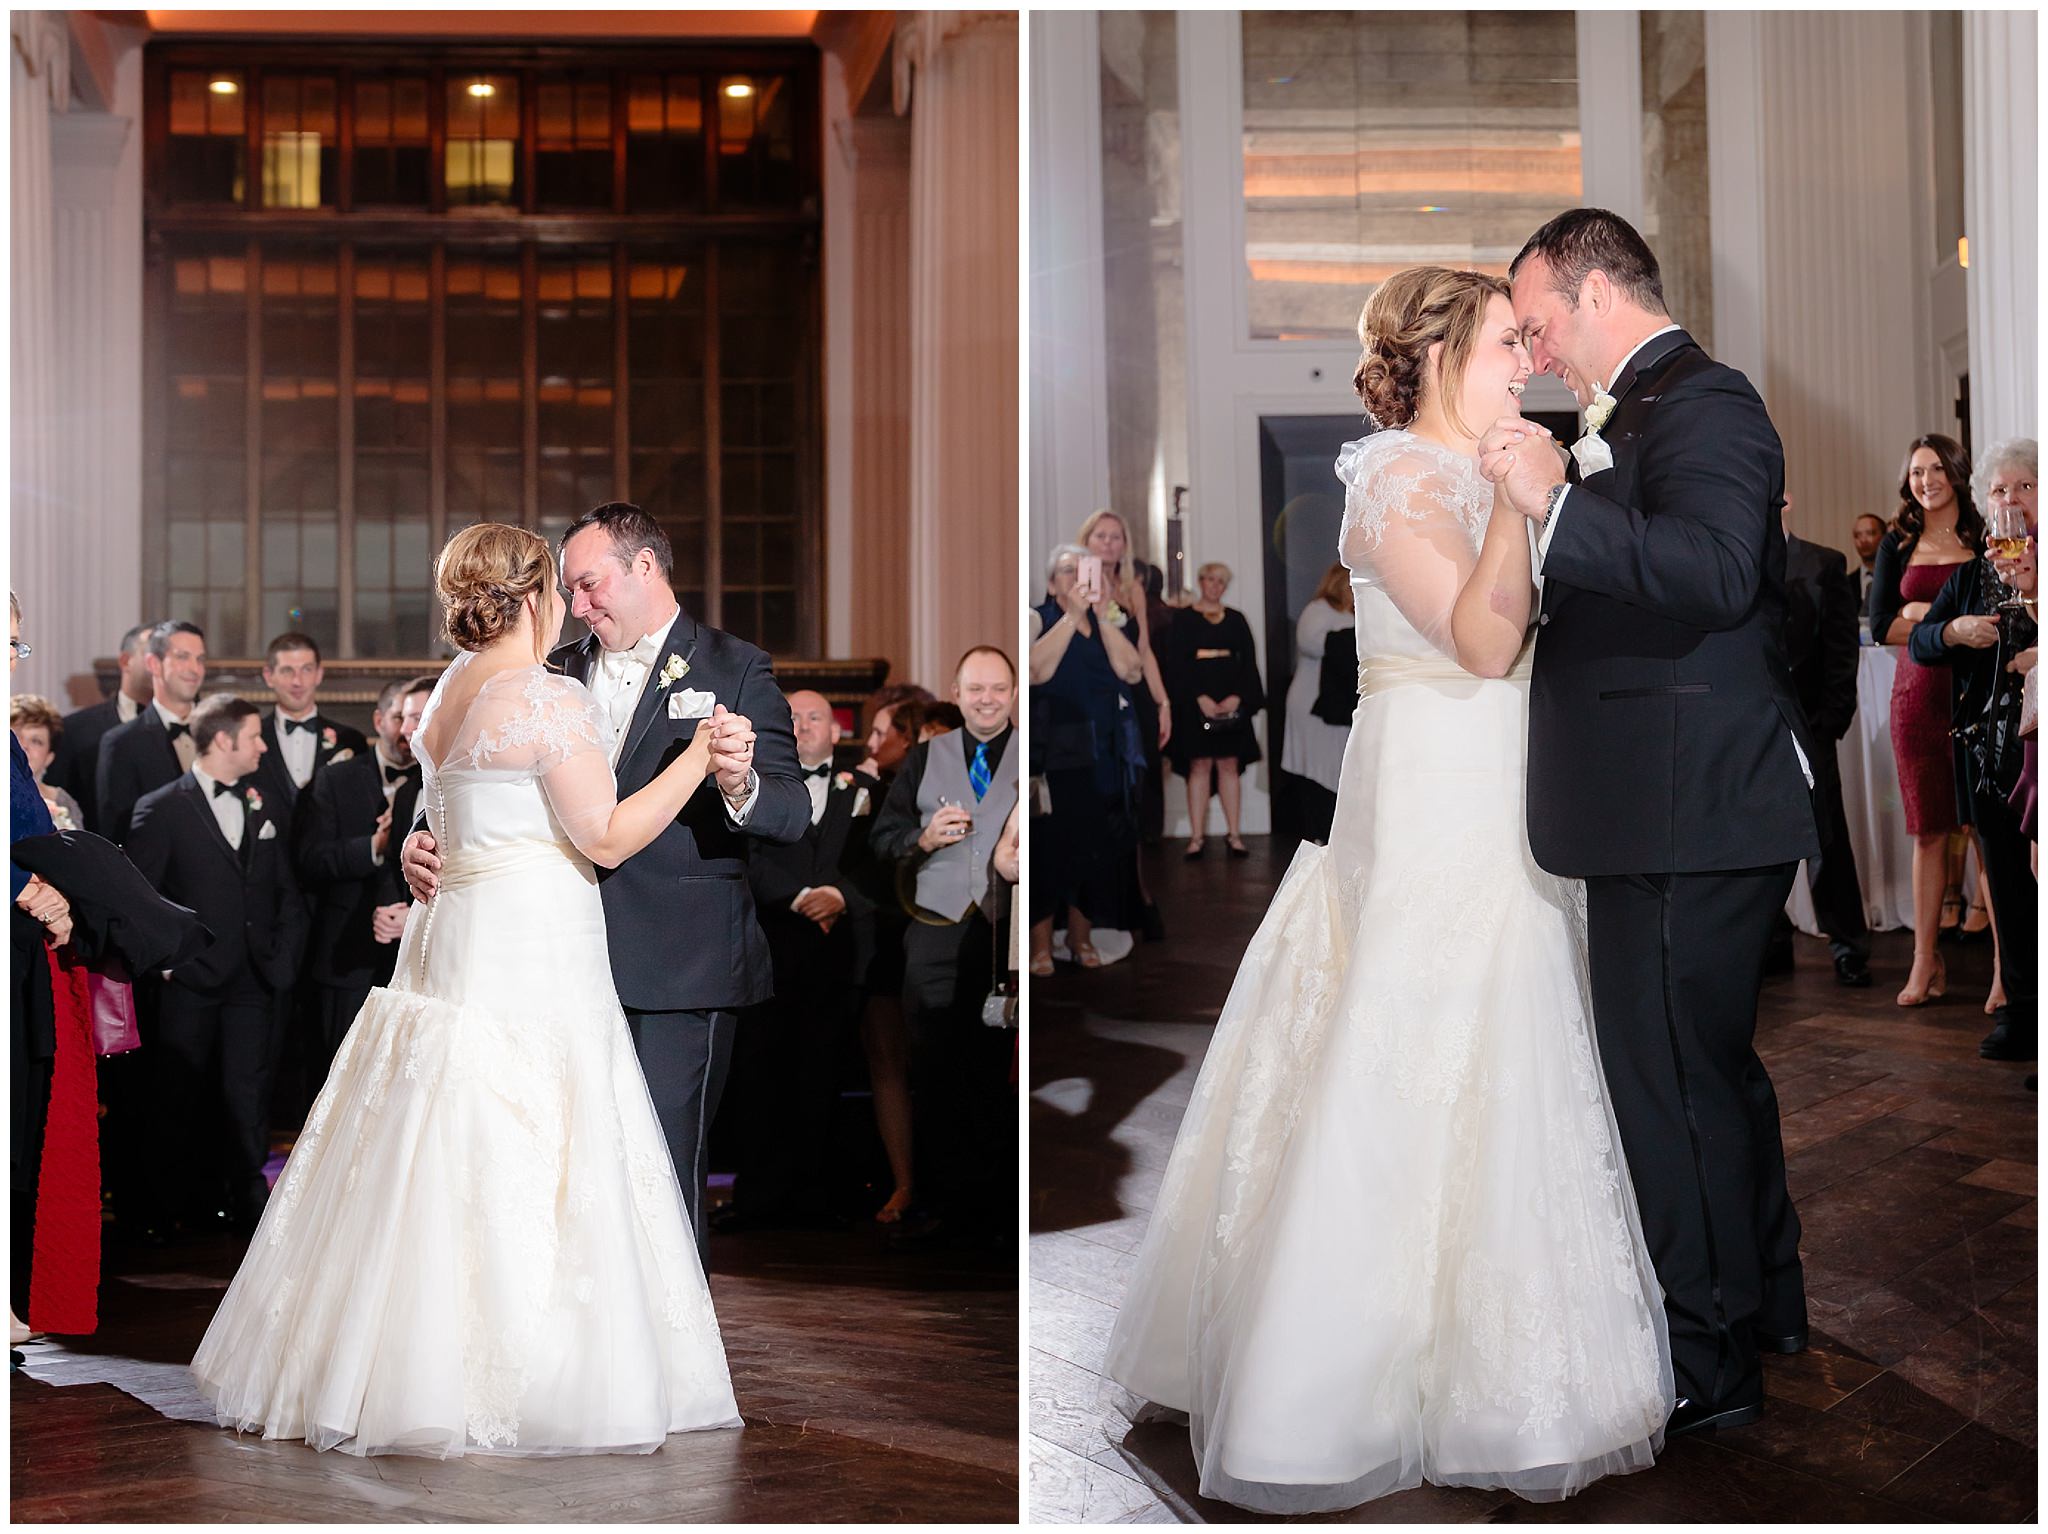 Bride & groom's first dance at Pittsburgh's Hotel Monaco